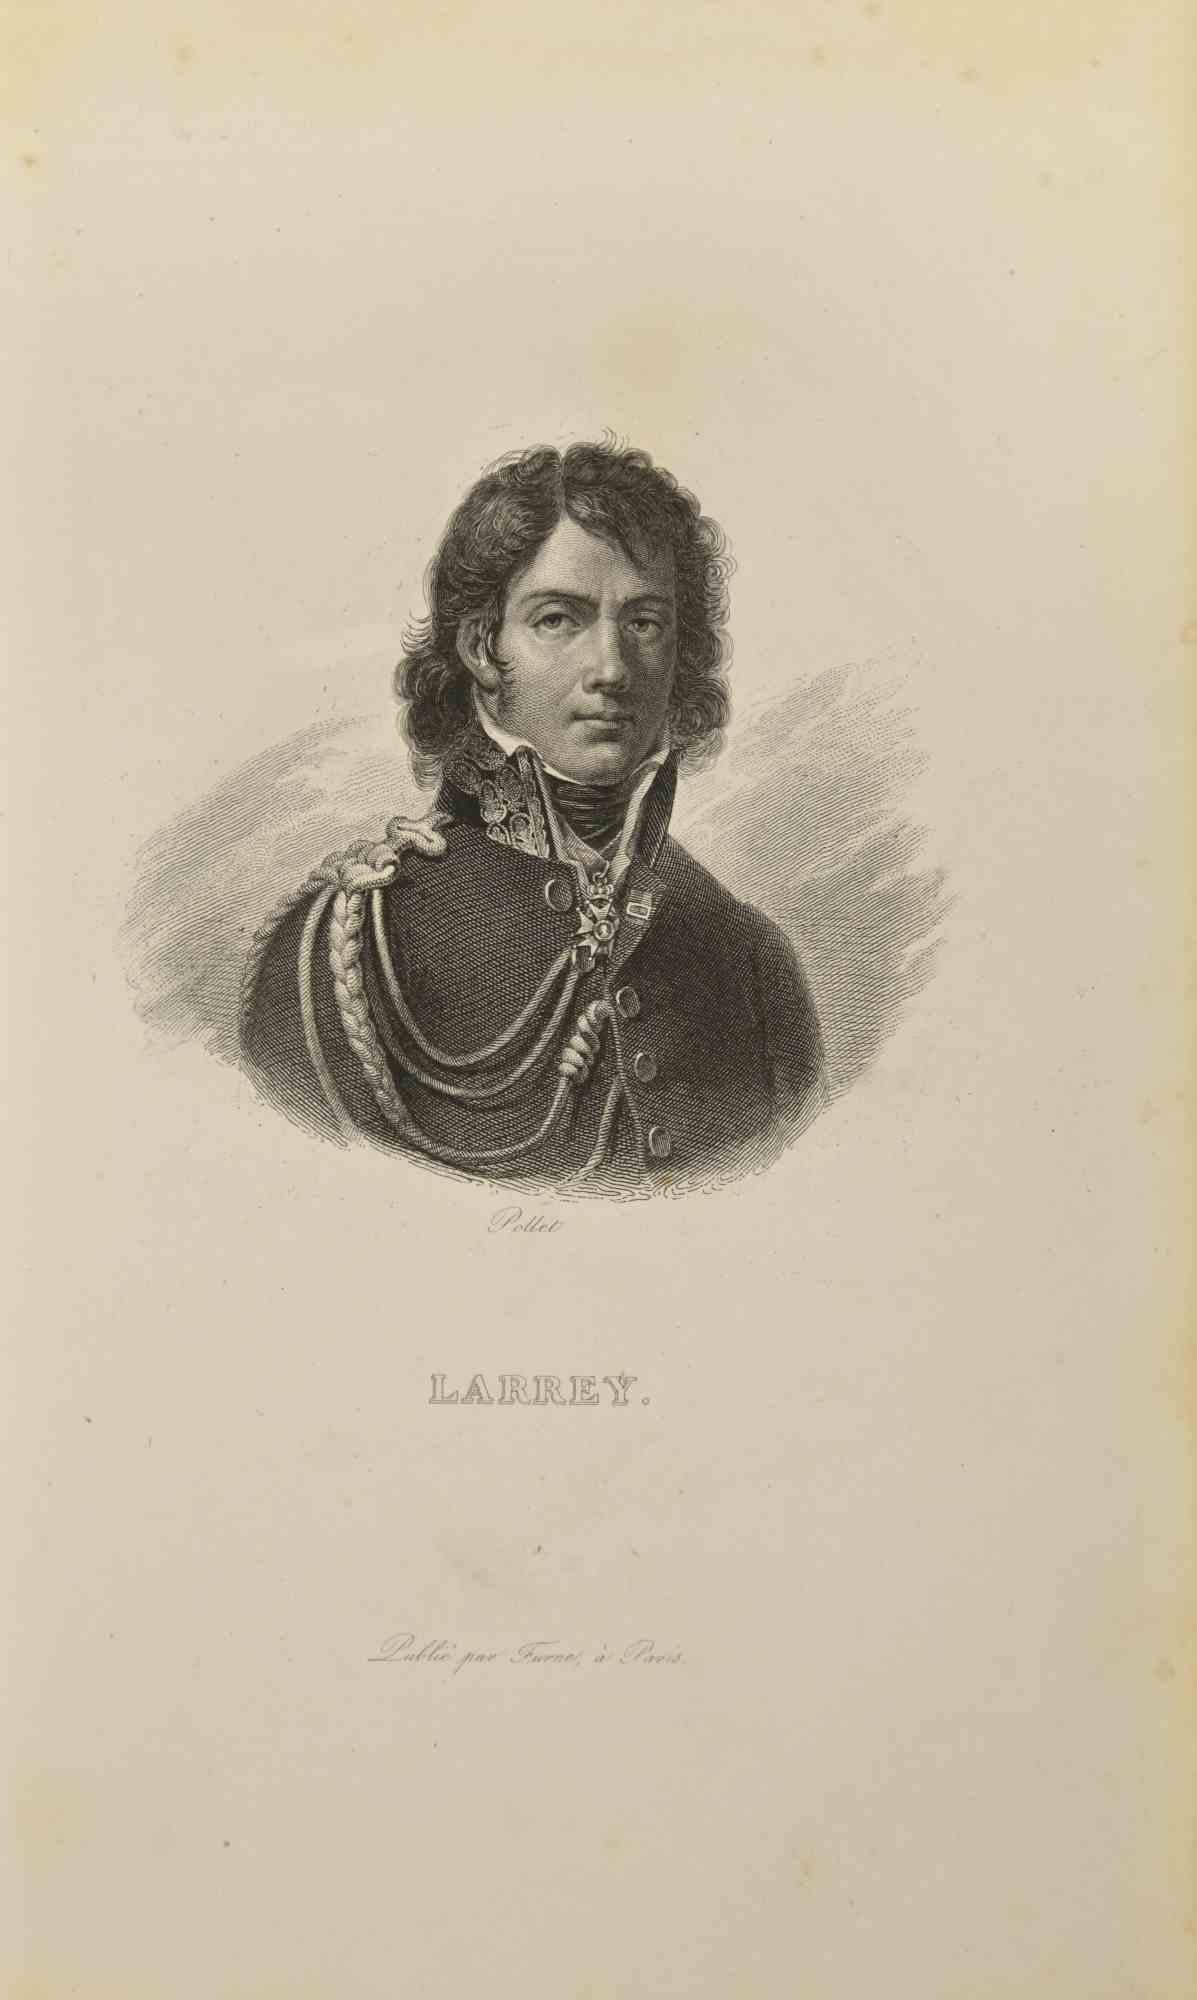 Larrey is an etching realized by Pollet in 1837.

Good conditions.

The artwork is realized in a well-balanced composition. the artwork and belongs to the suite suite "AtlasBatt" realized within Jacques Norvins' Histoire de Napoleon, published in